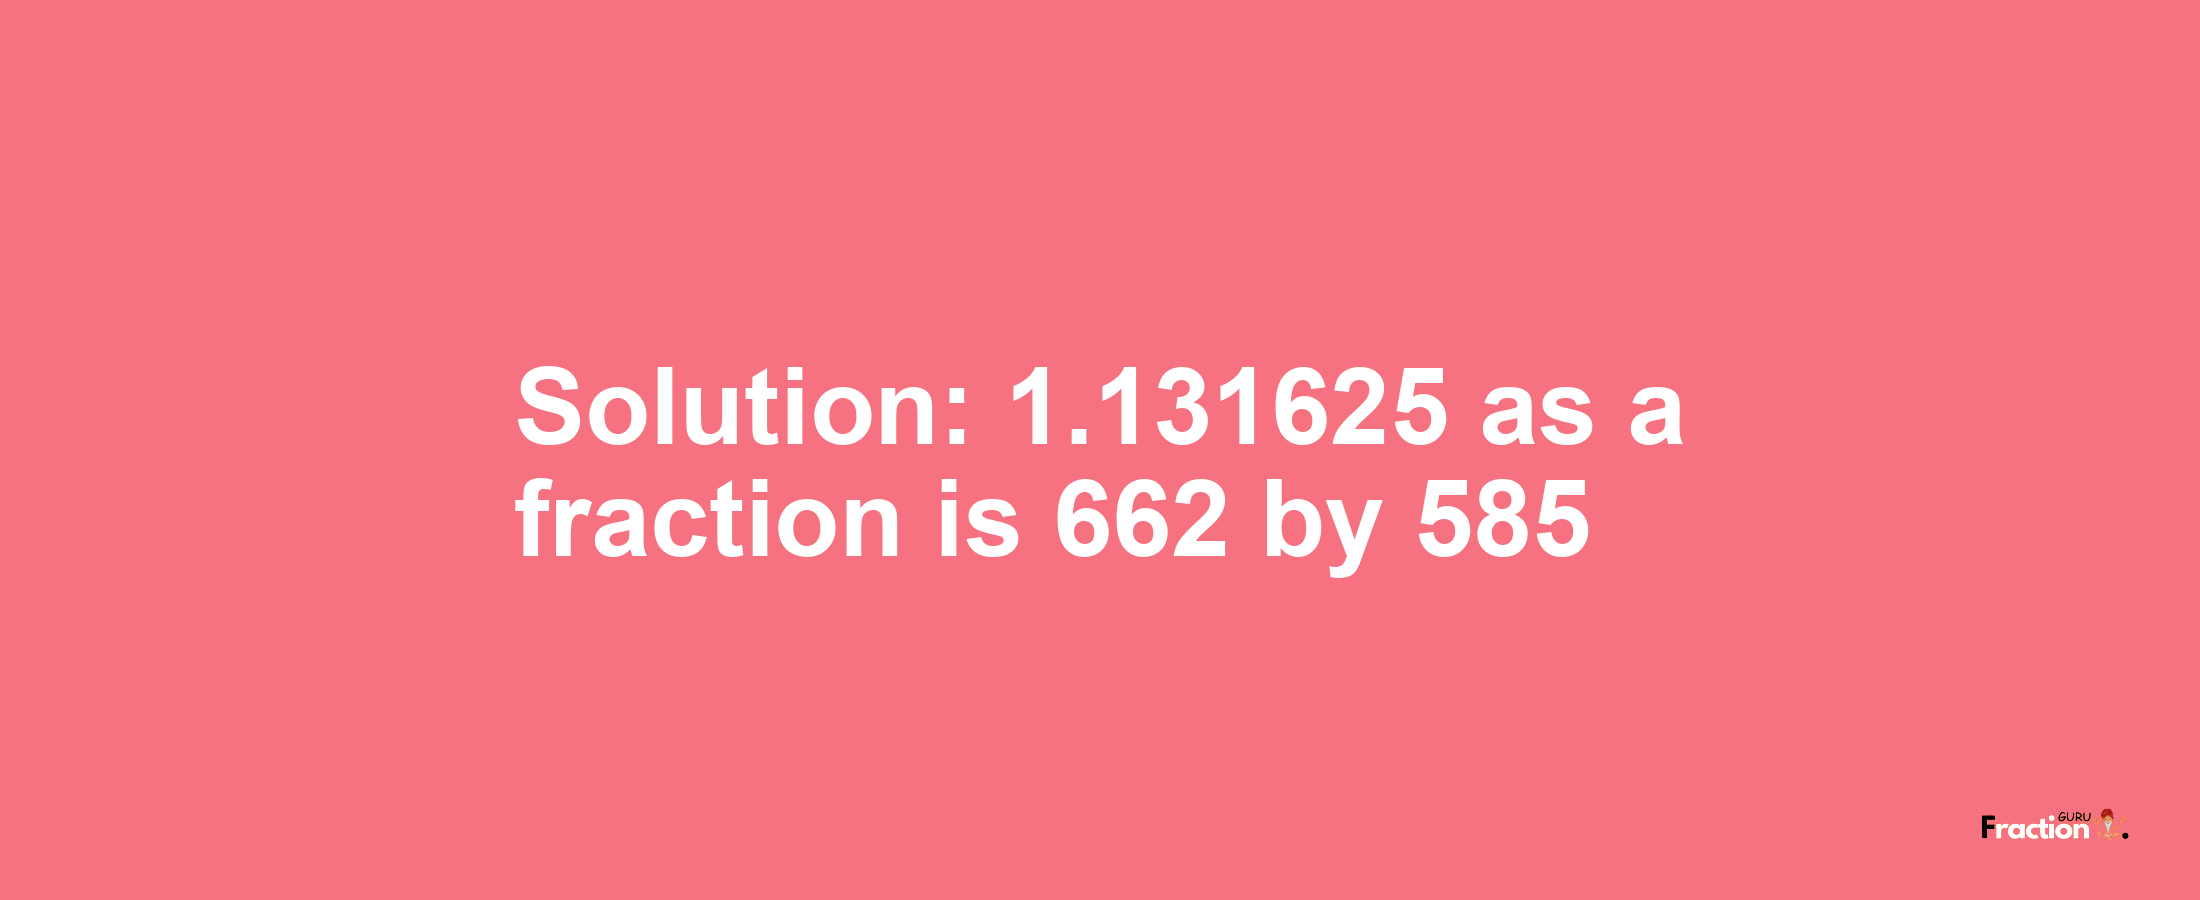 Solution:1.131625 as a fraction is 662/585